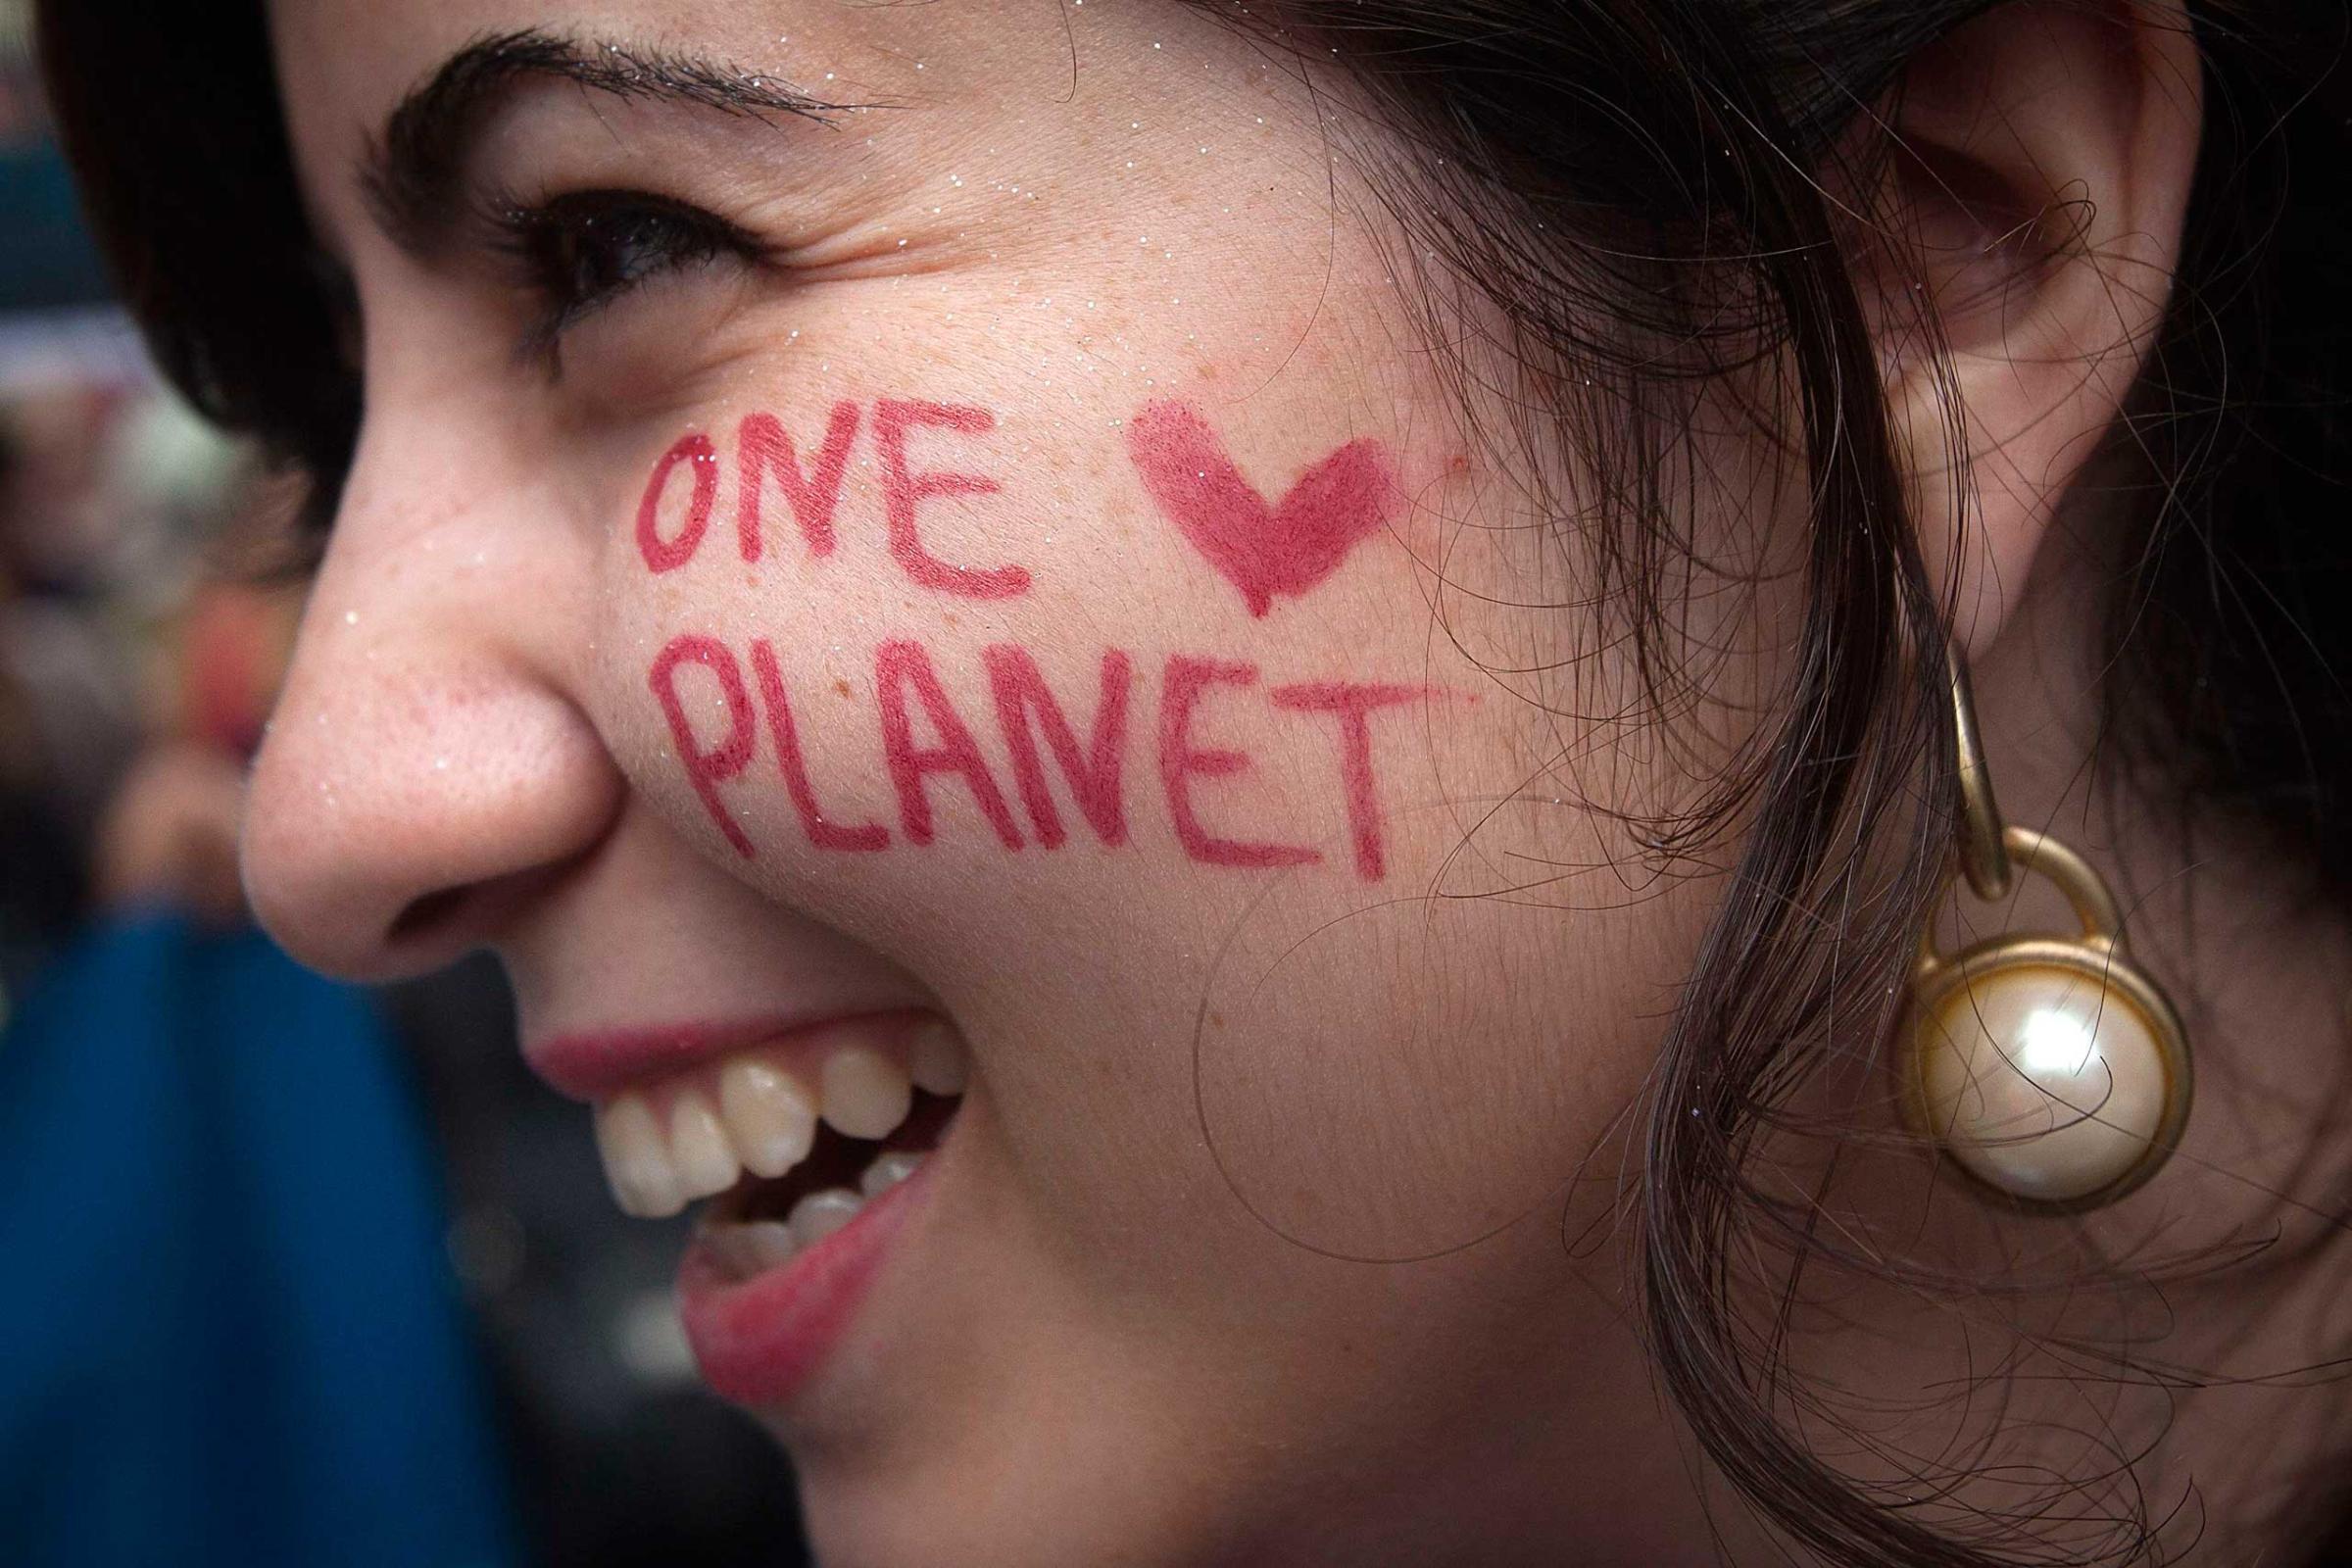 A protester with "One Planet" drawn on her face takes part in the "People's Climate March" down 6th Ave. in the Manhattan borough of New York